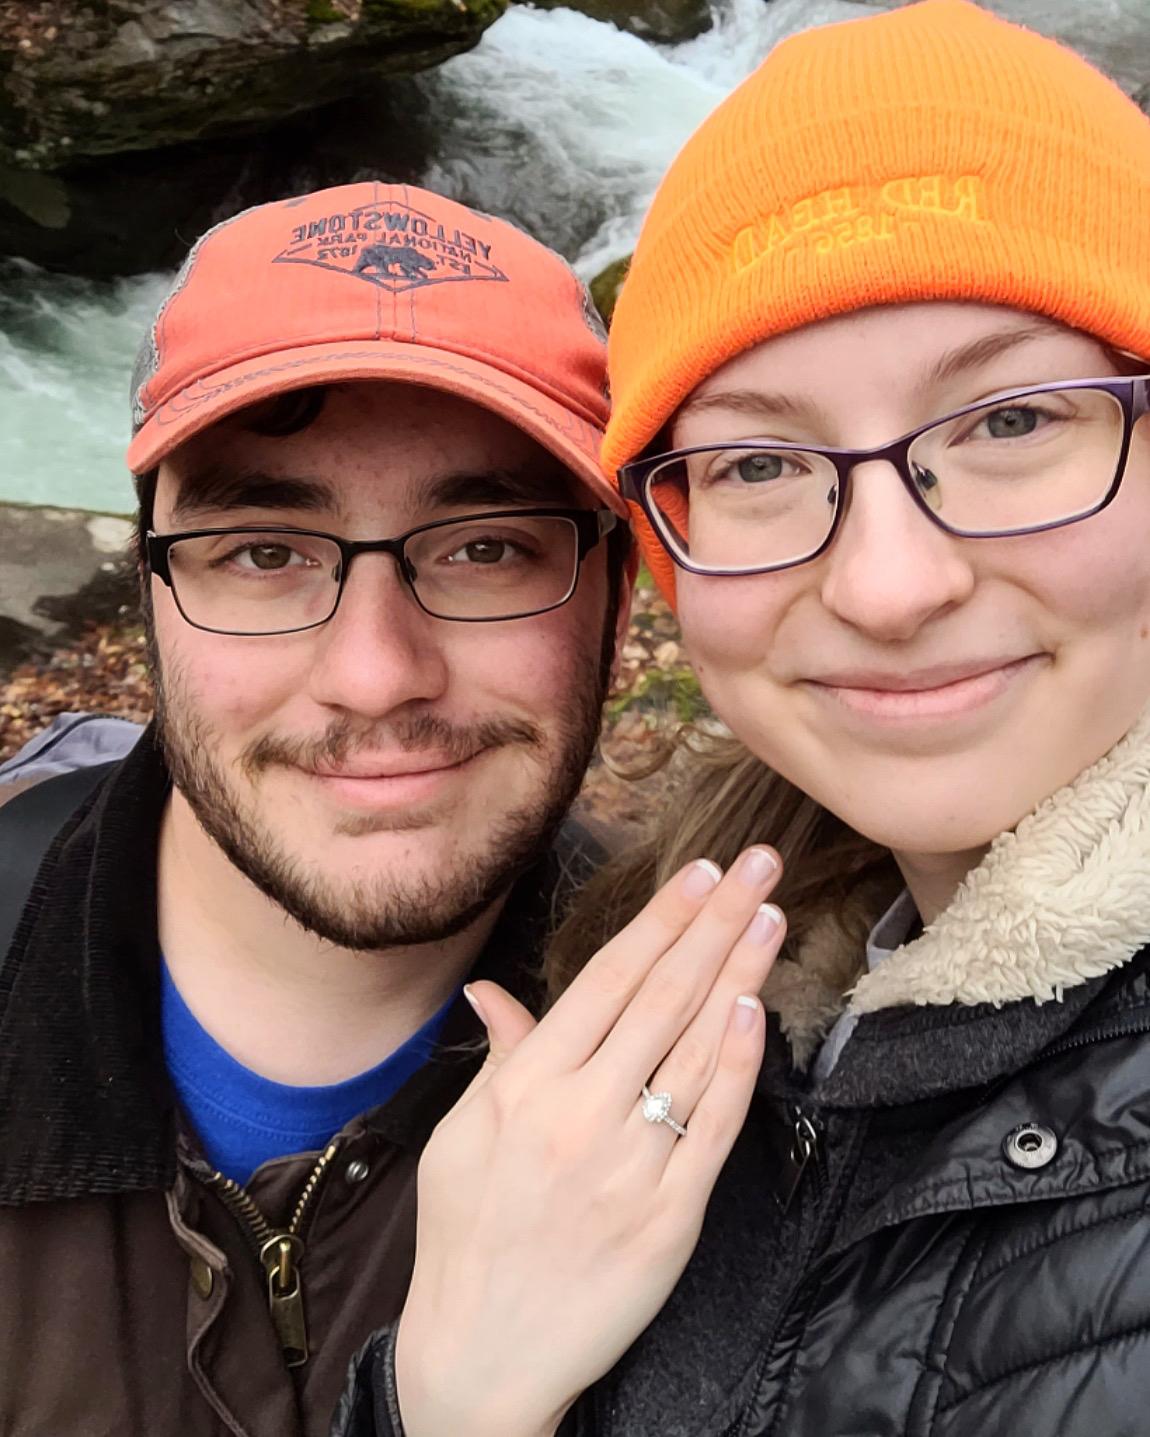 April 10th, 2022: Leah and Conner’s first hike as an engaged couple.